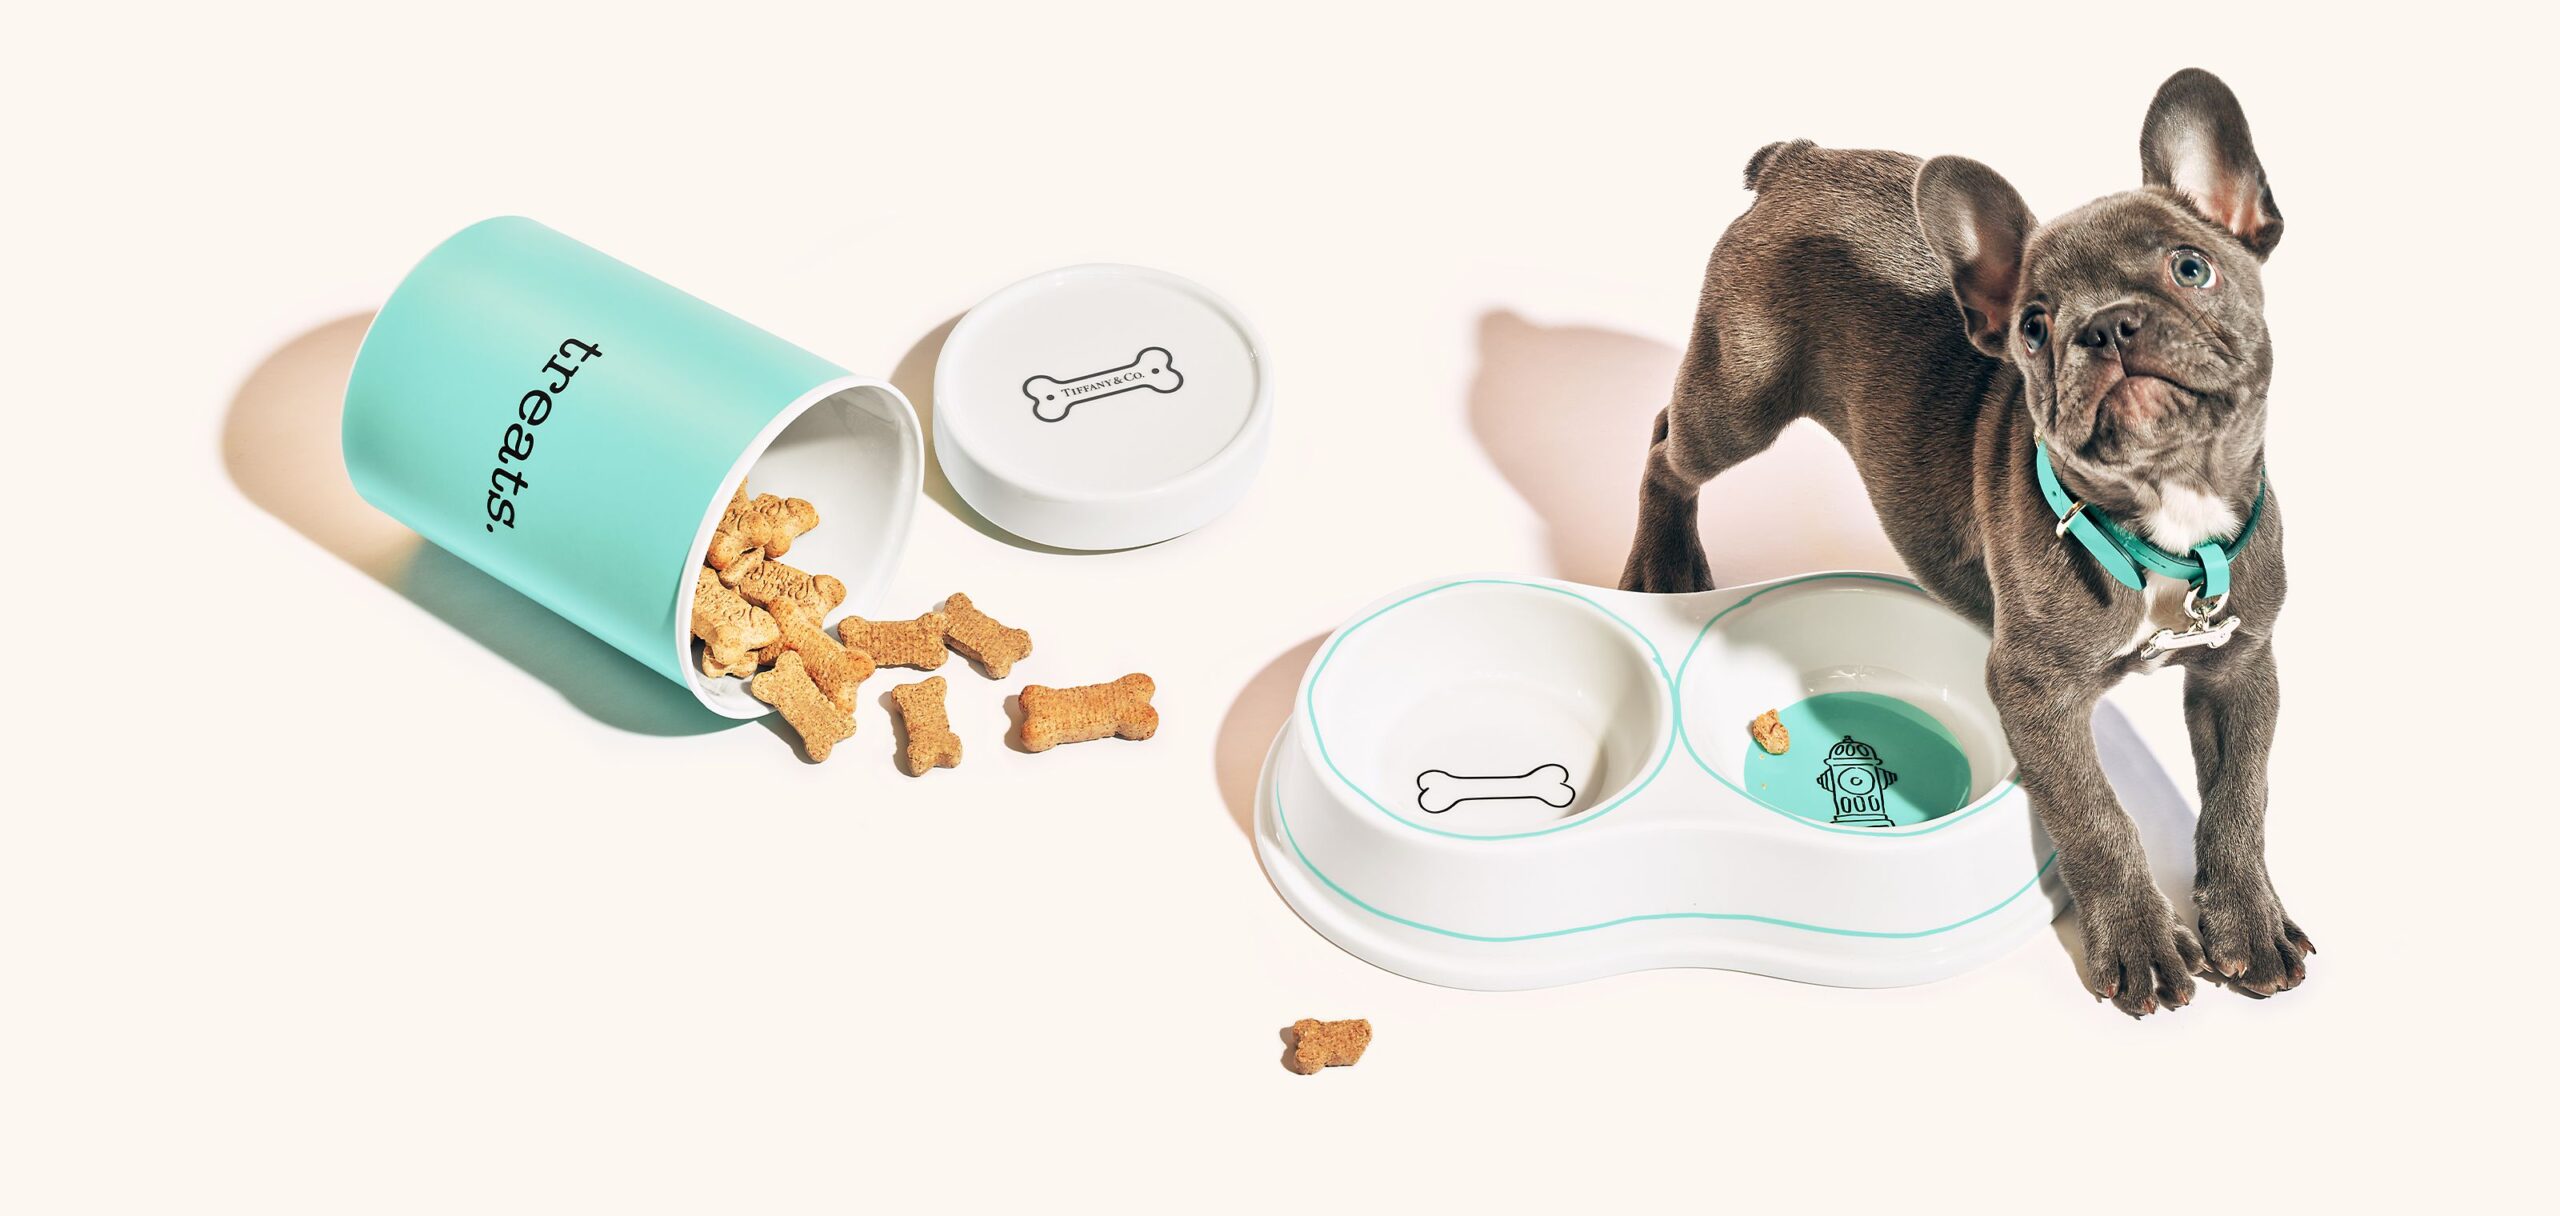 Image of a black French bulldog puppy wearing a blue Tiffany & Co. collar. Beside him is a blue and white Tiffany & Co. dog bowl and a blue treats jar with dog treats spilling out.